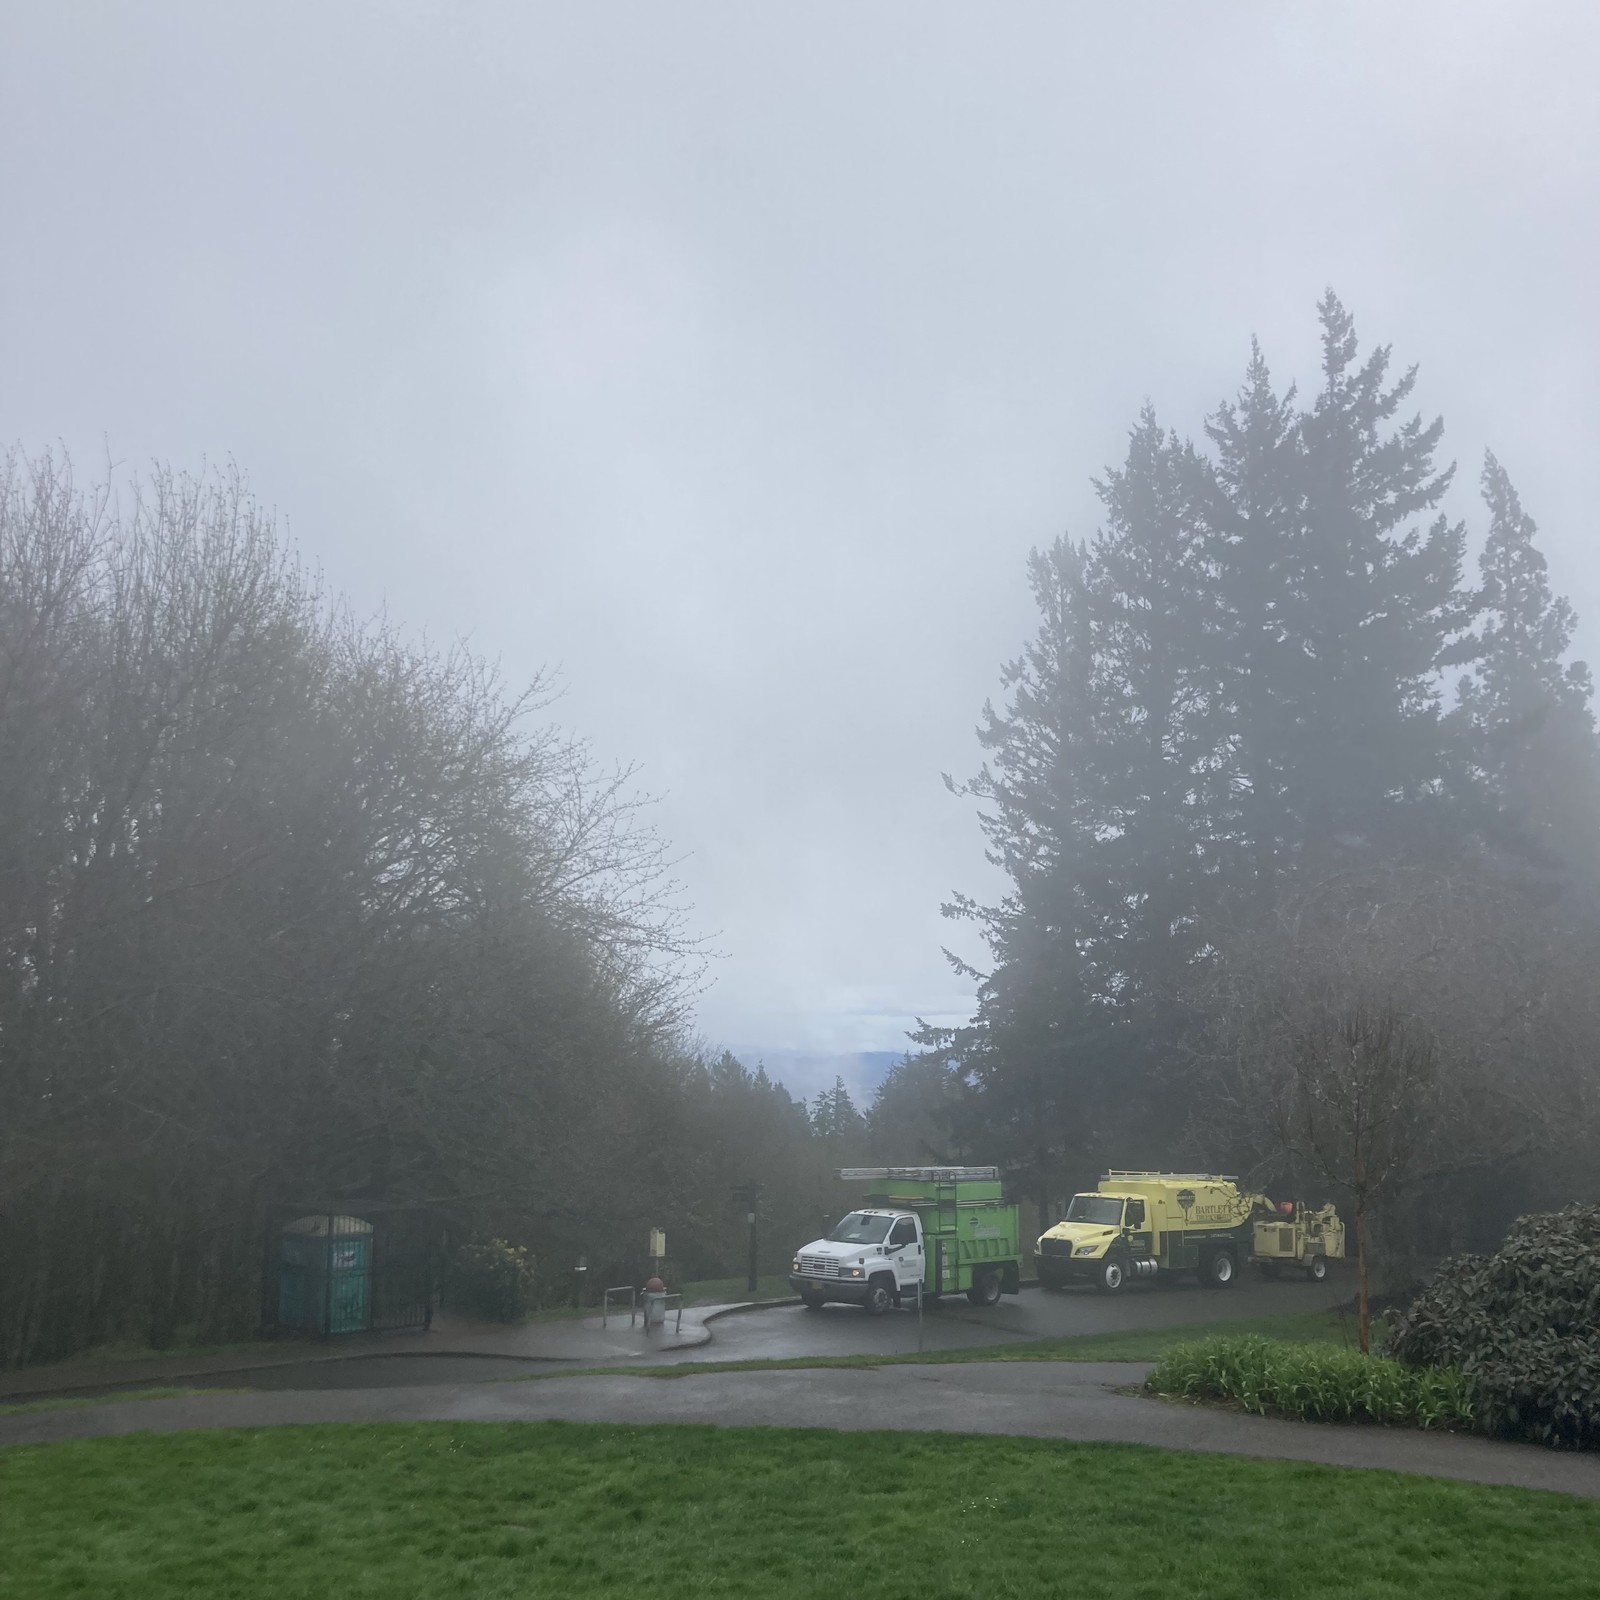 Hilltop park cloaked in fog. Two trucks and associated equipment are parked about 100' away, they are branded with “Bartlett Tree Experts”